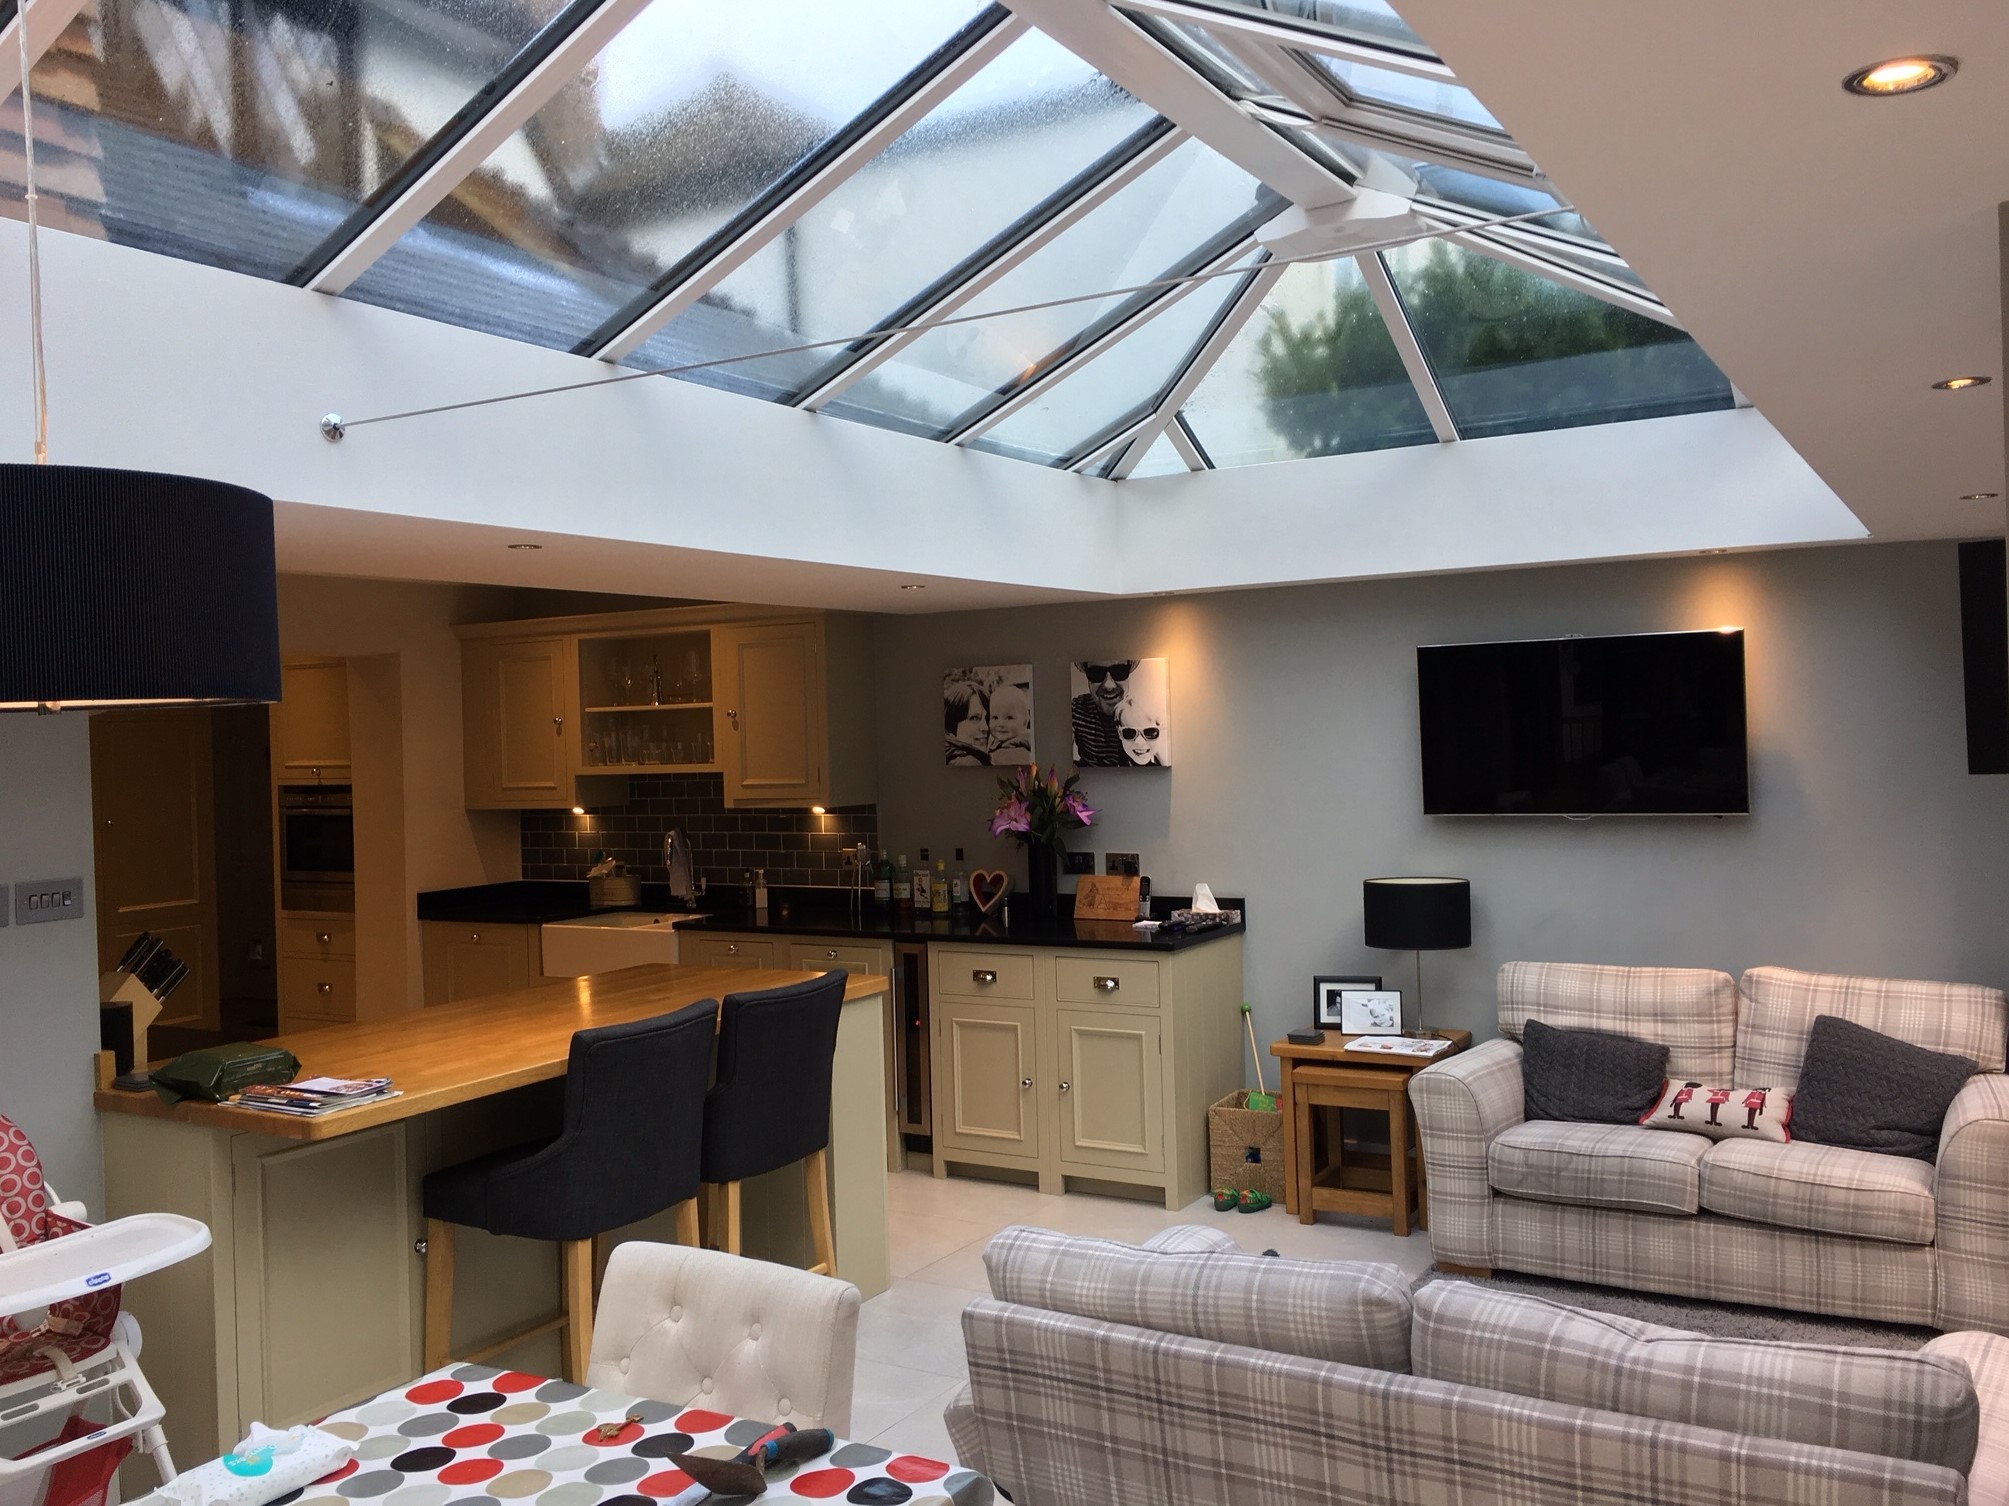 What will a conservatory upgrade cost?